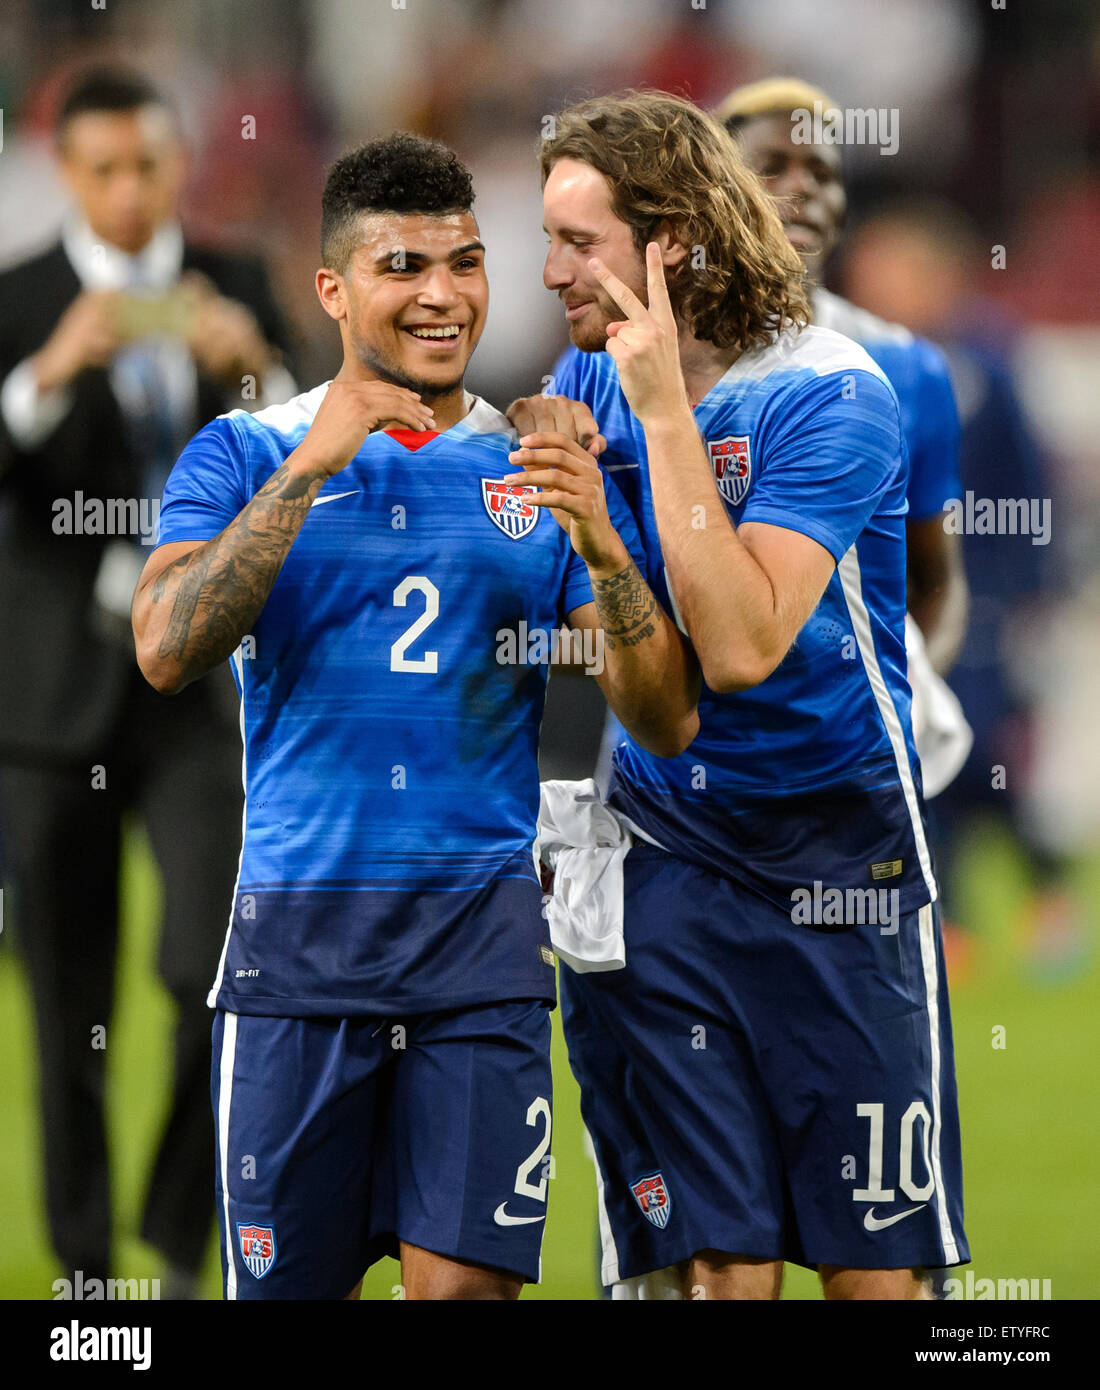 Cologne, Germany. 10th June, 2015. DeAndre Yedlin (L) and Mix Diskerud of the USA celebrate after the international friendly soccer match between Germany and the USA at RheinEnergieStadion in Cologne, Germany, 10 June 2015. The USA won the match 2-1. Photo: Thomas Eisenhuth/dpa - NO WIRE SERVICE -/dpa/Alamy Live News Stock Photo